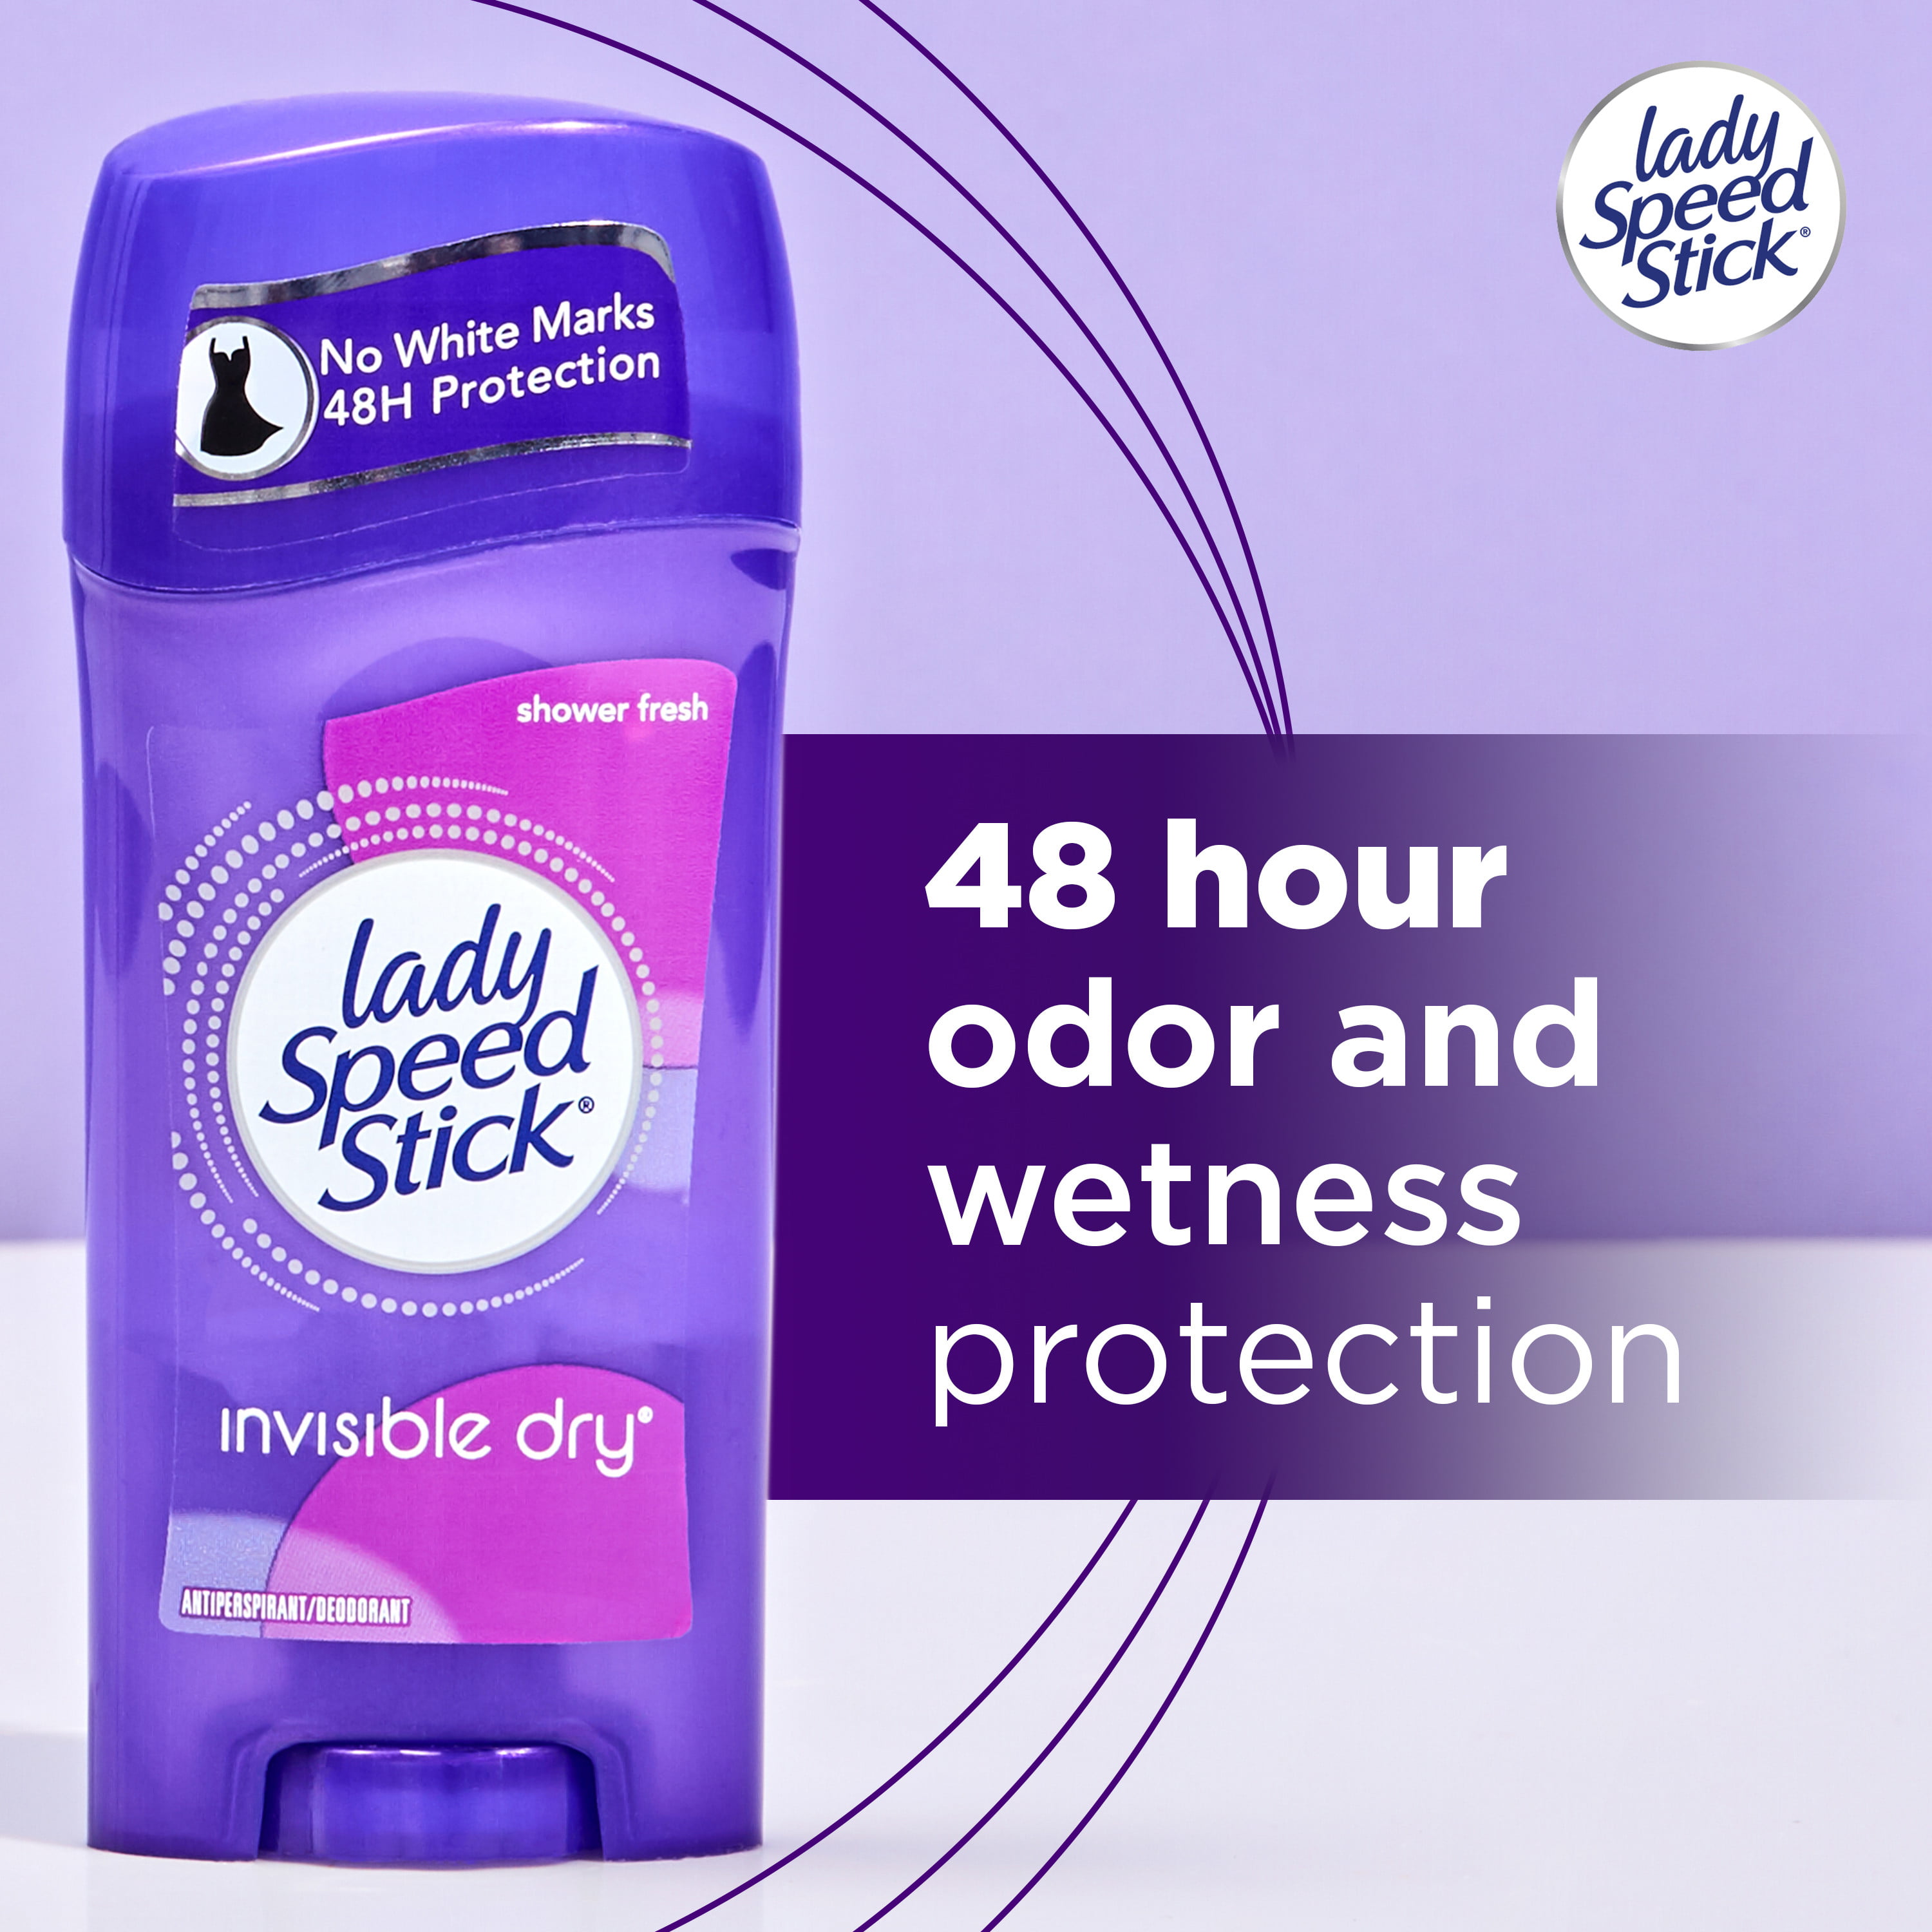 Lady Speed Stick Invisible Dry Antiperspirant Female Deodorant, Shower Fresh, 2 Pack, 2.3 oz - image 6 of 15